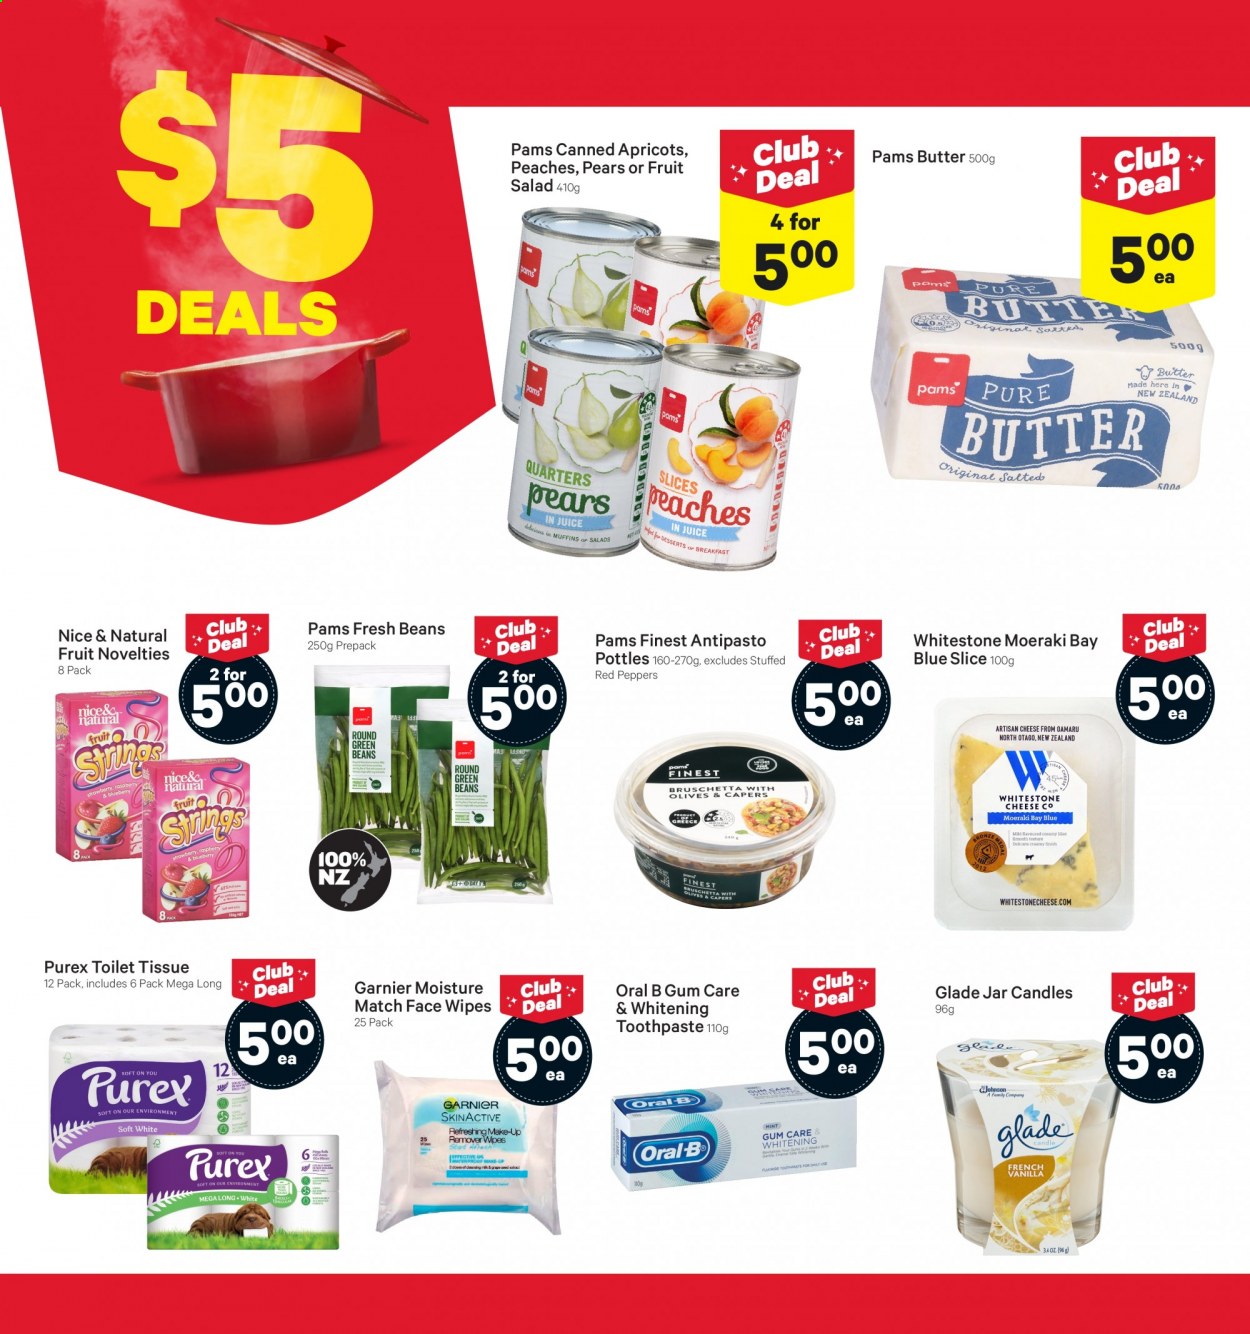 thumbnail - New World mailer - 15.02.2021 - 21.02.2021 - Sales products - green beans, muffin, beans, salad, pears, apricots, peaches, cheese, butter, capers, olives, fruit salad, juice, Johnson's, toilet paper, tissues, Oral-B, toothpaste, Garnier, Glade. Page 3.